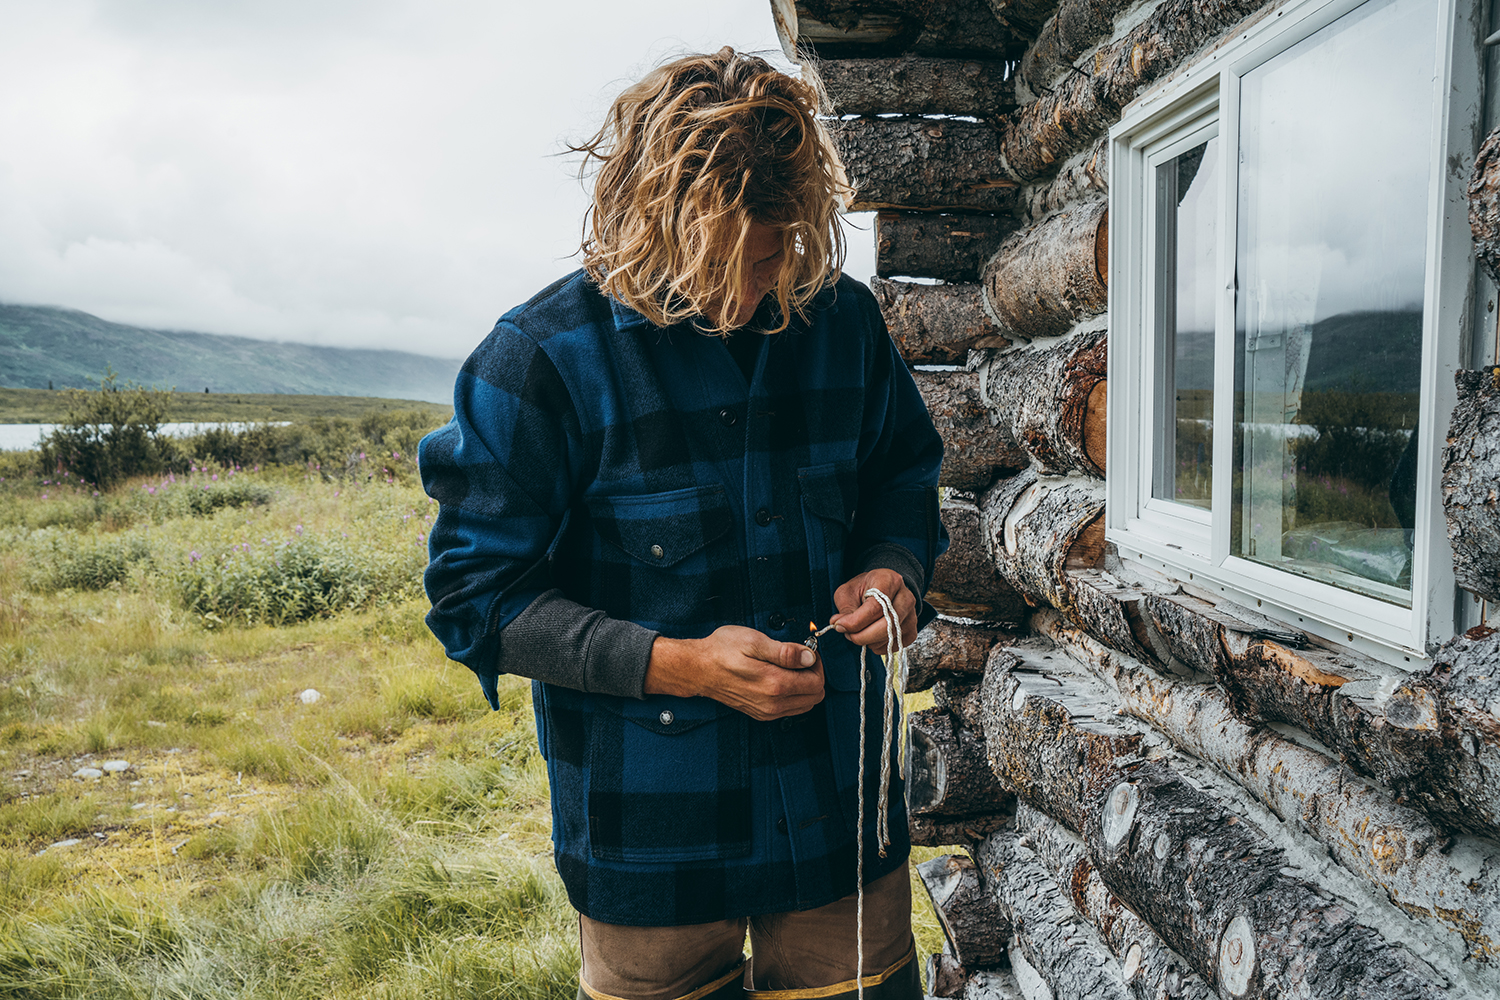 10 Outdoor Clothing Stores You Should Know